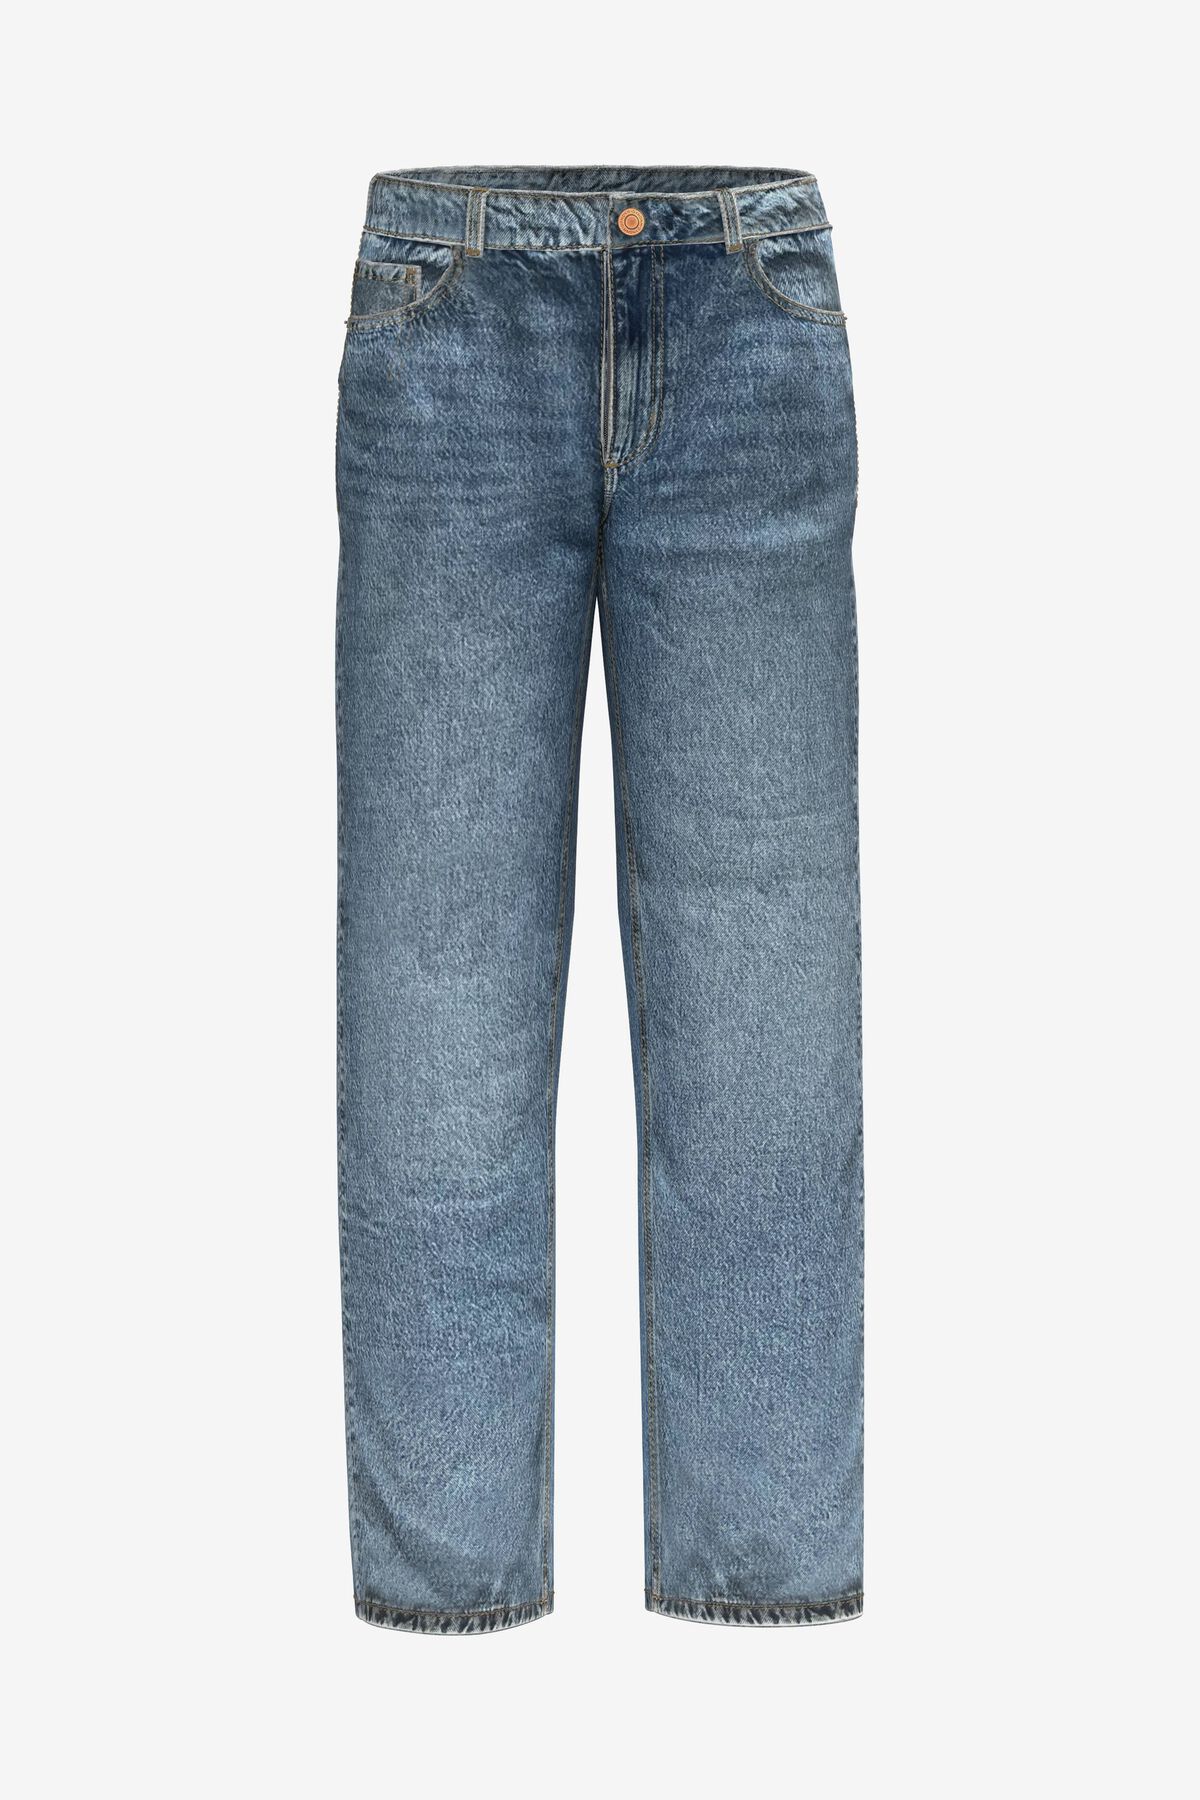 Dynamite Mika Relaxed Straight Mid Rise Jeans. 6